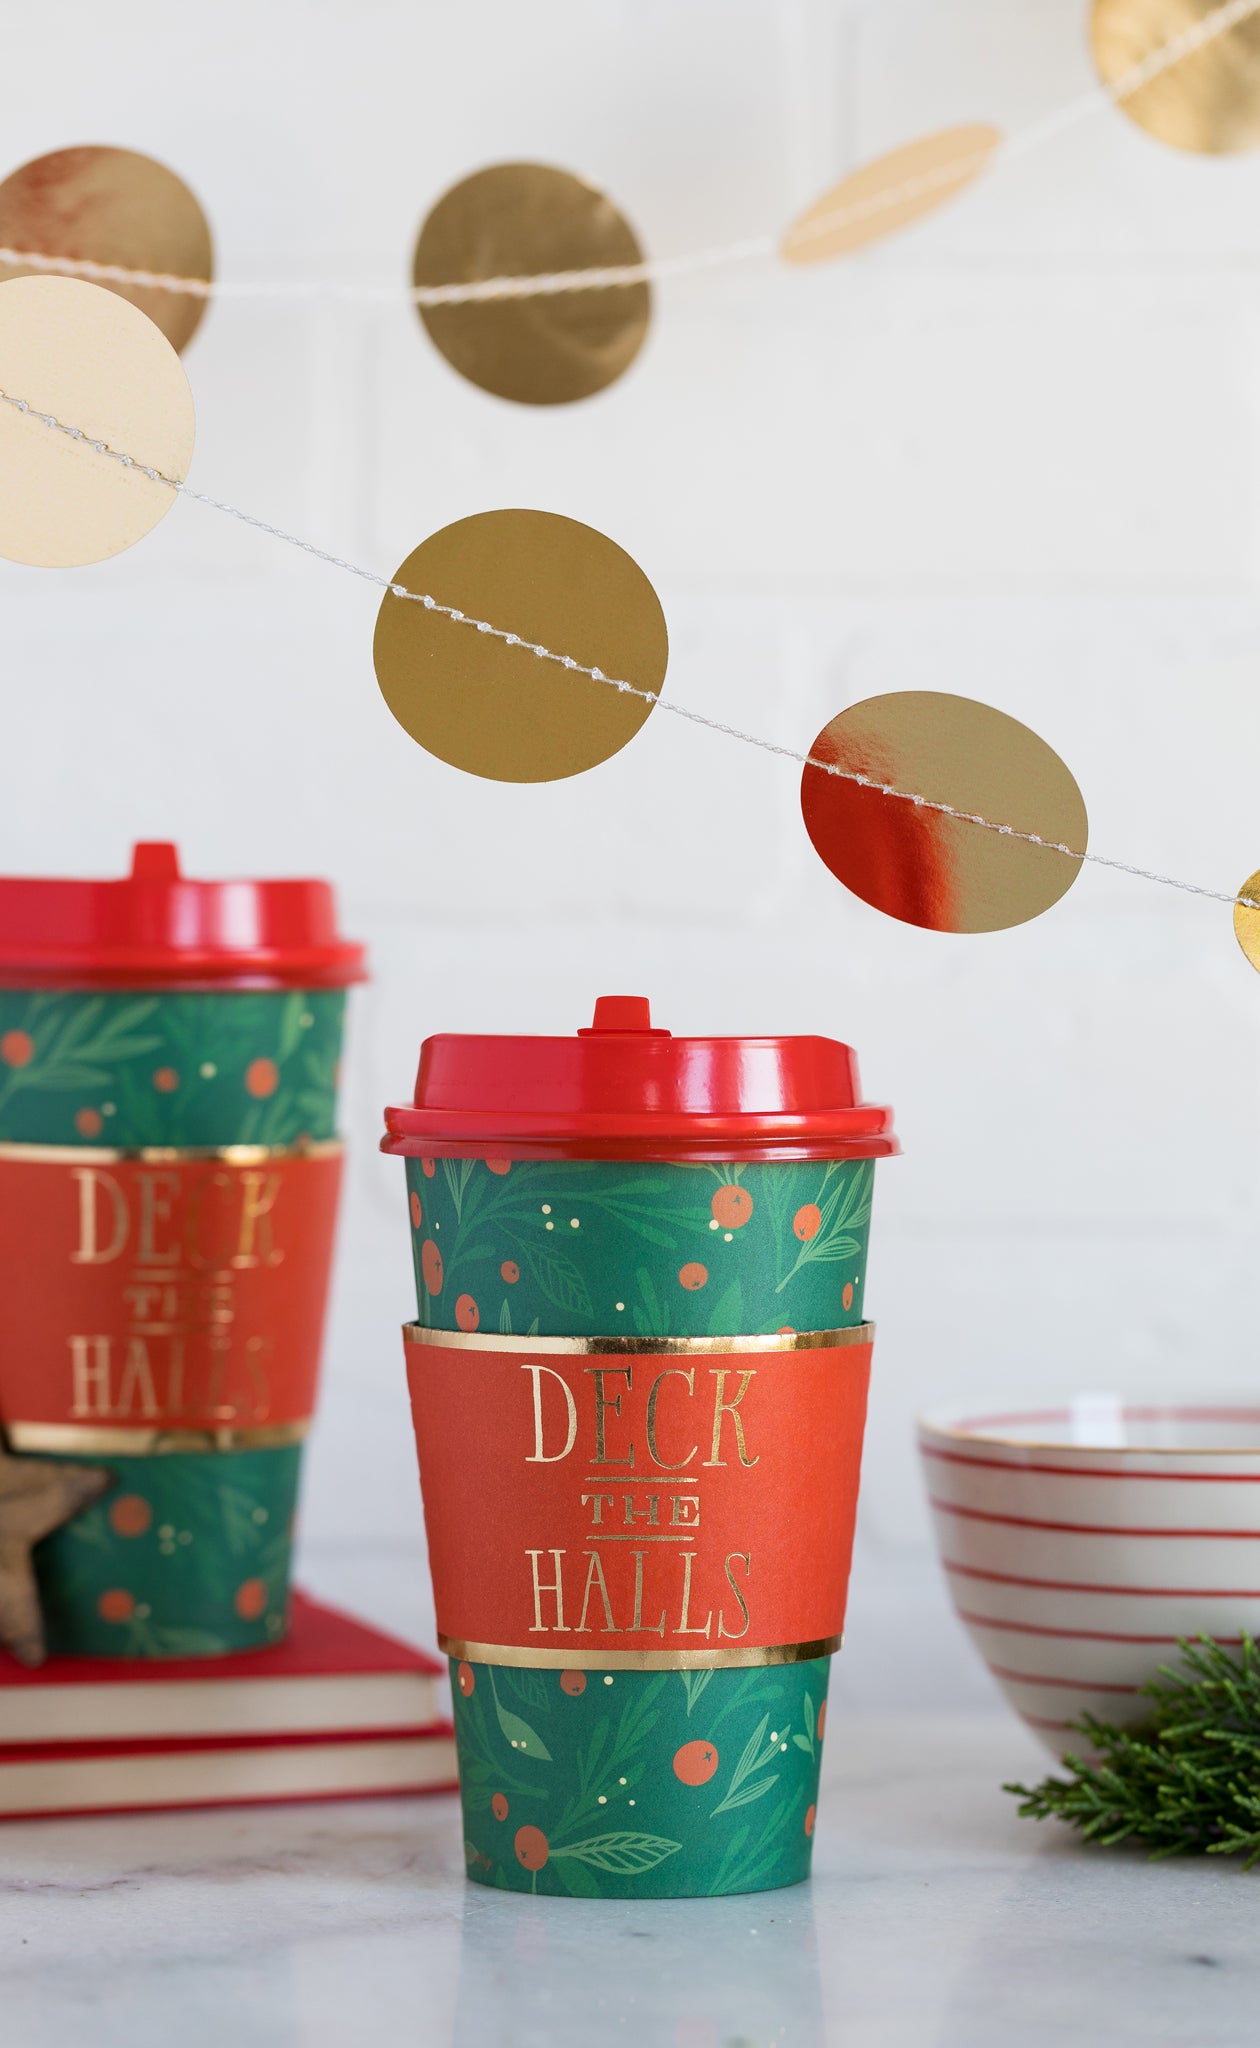 PLLC05 - Deck the Halls Coffee Cups 8 ct